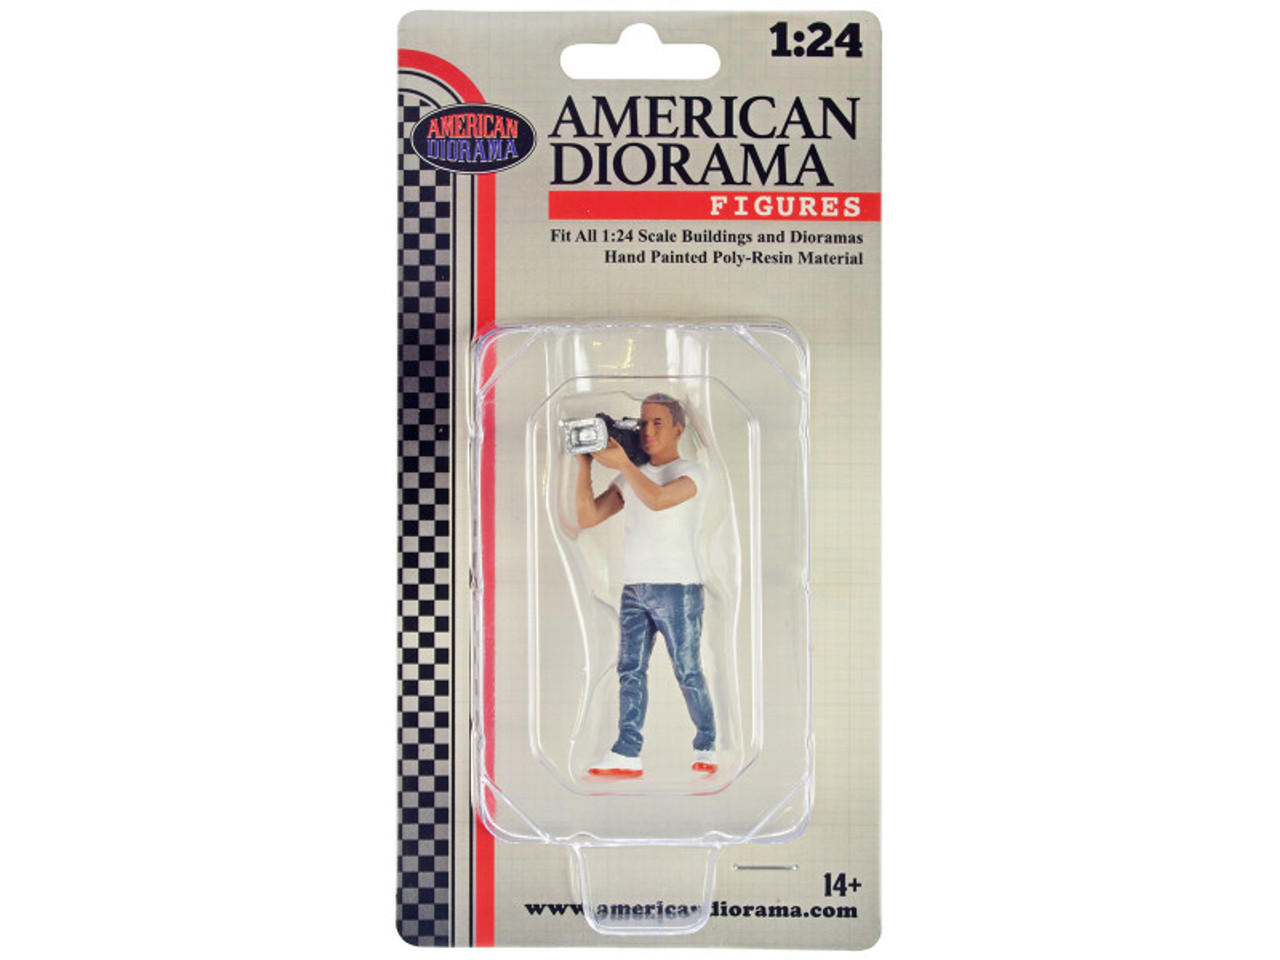 "On-Air" Figure 3 for 1/24 Scale Models by American Diorama